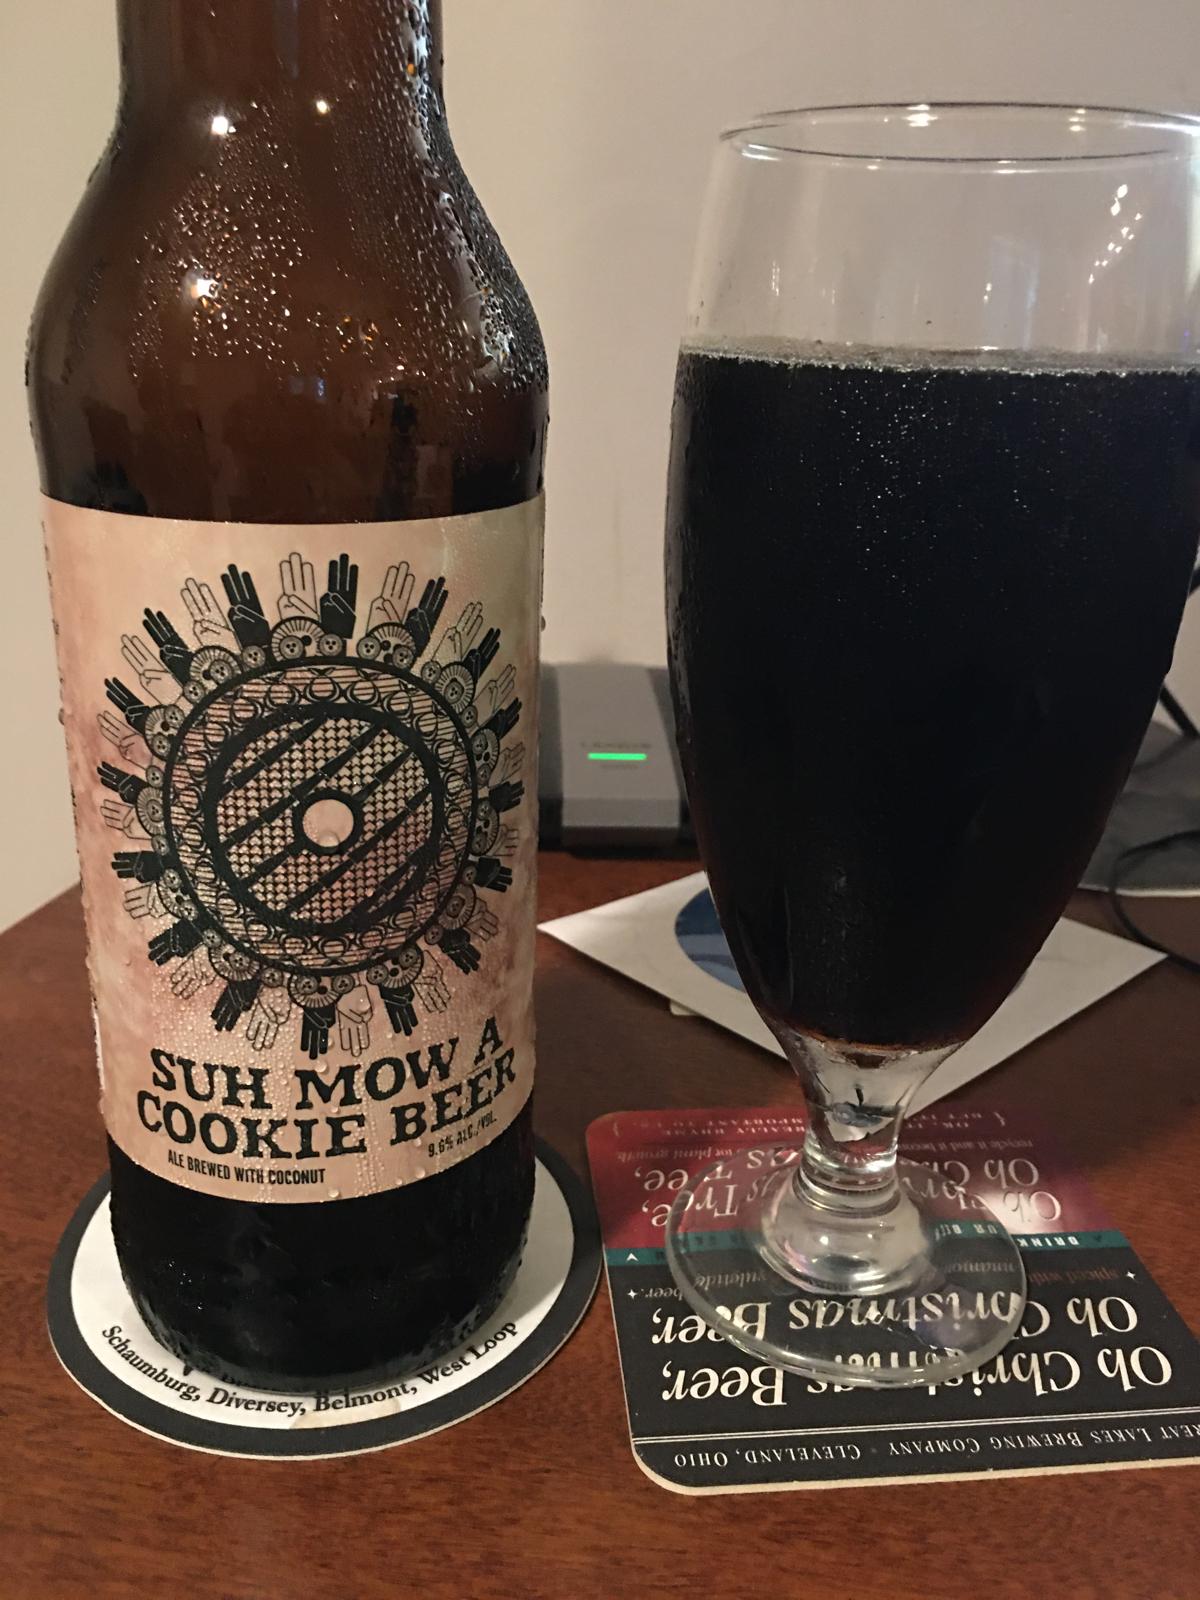 Suh Mow A Cookie Beer